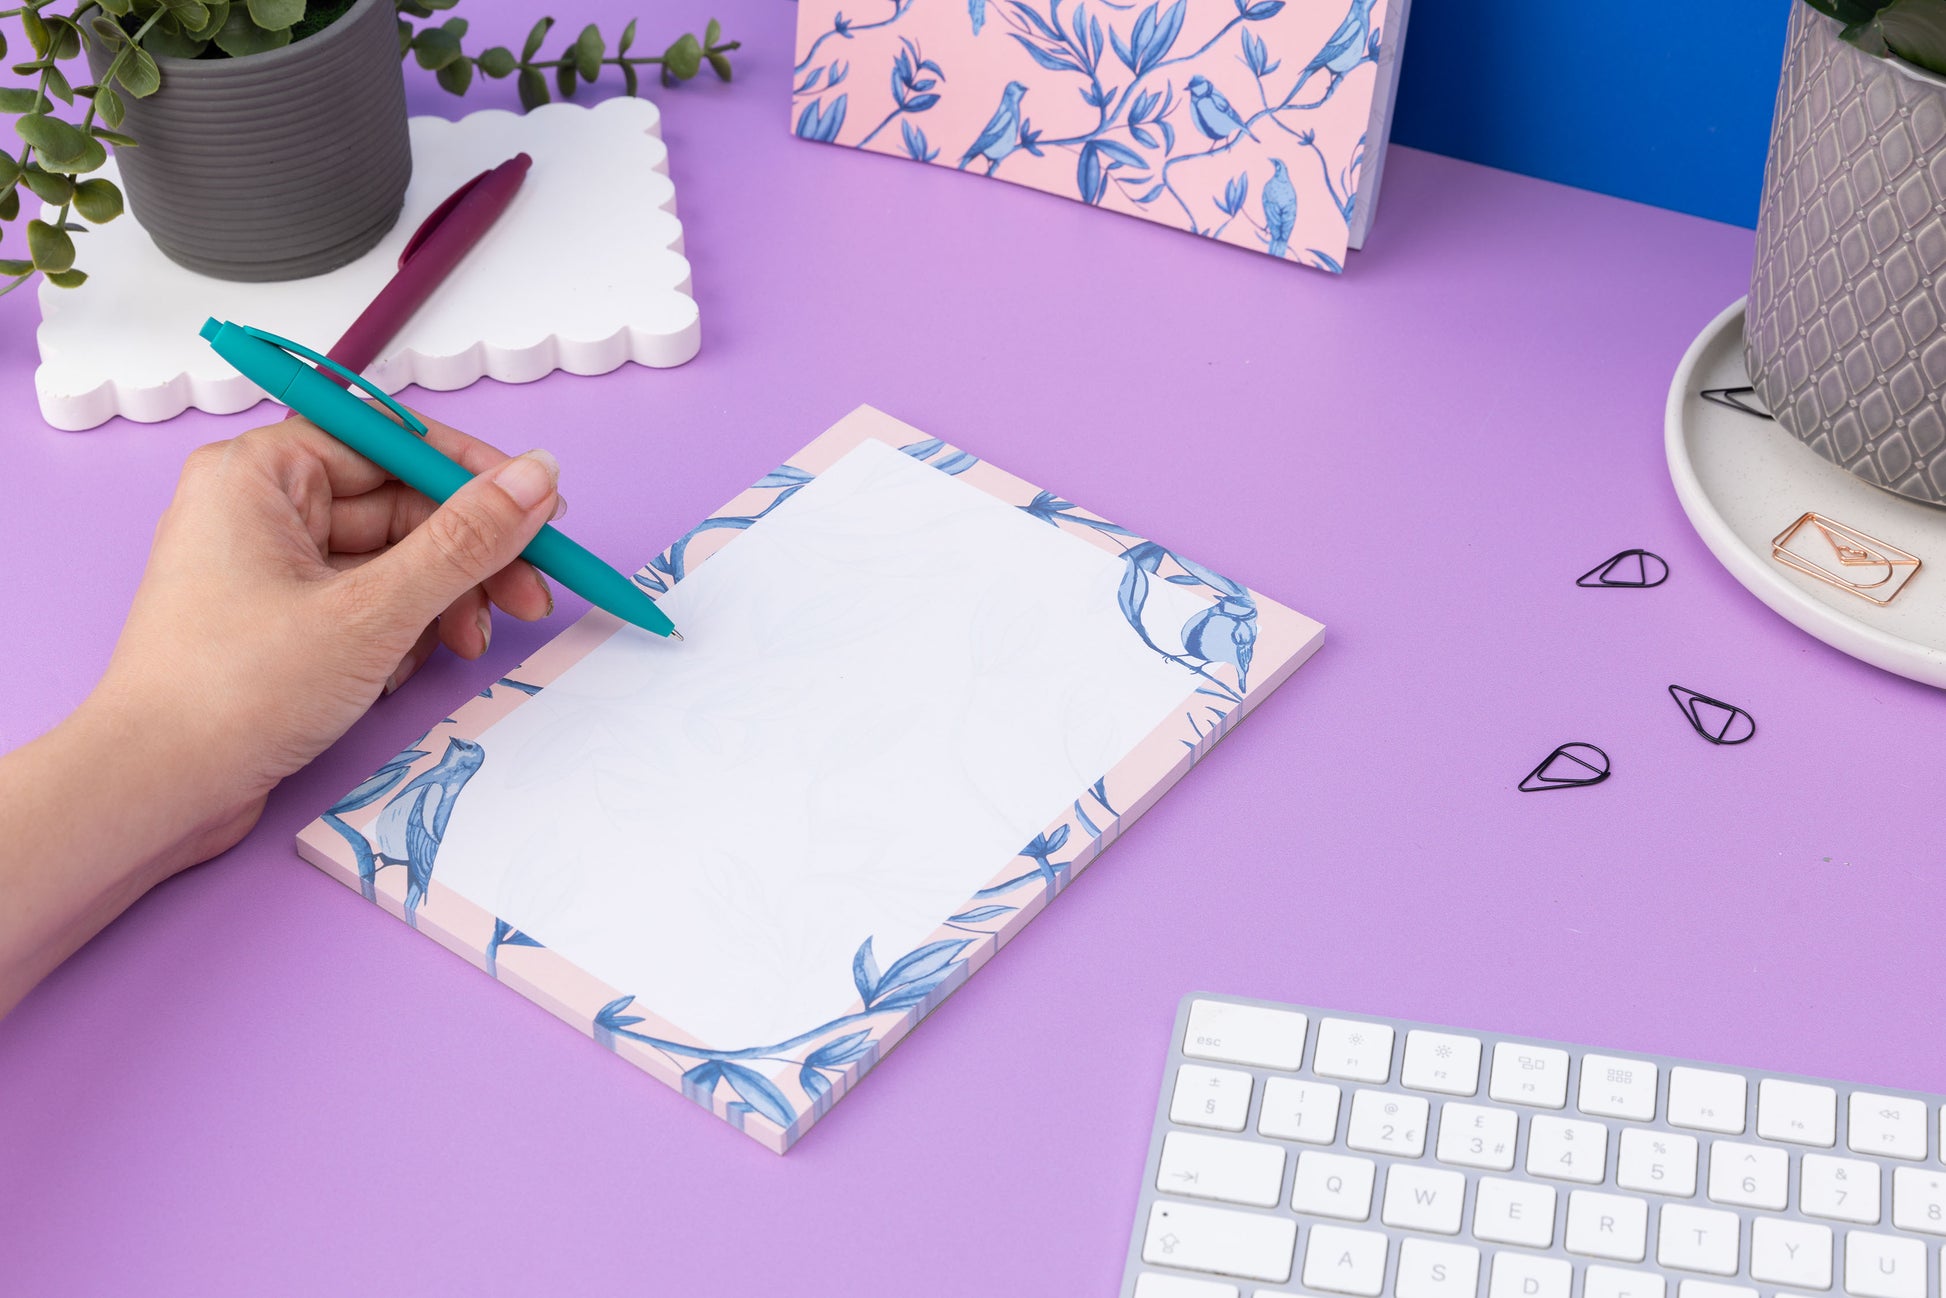 Brighton Birds A5 Notepad - Blush pink background with shades of blue bird and plant hand-painted motifs - is on a lilac desk, next to a white keyboard and scattered paperclips. There is a hand to its left holding a teal pen ready to write on the pad.